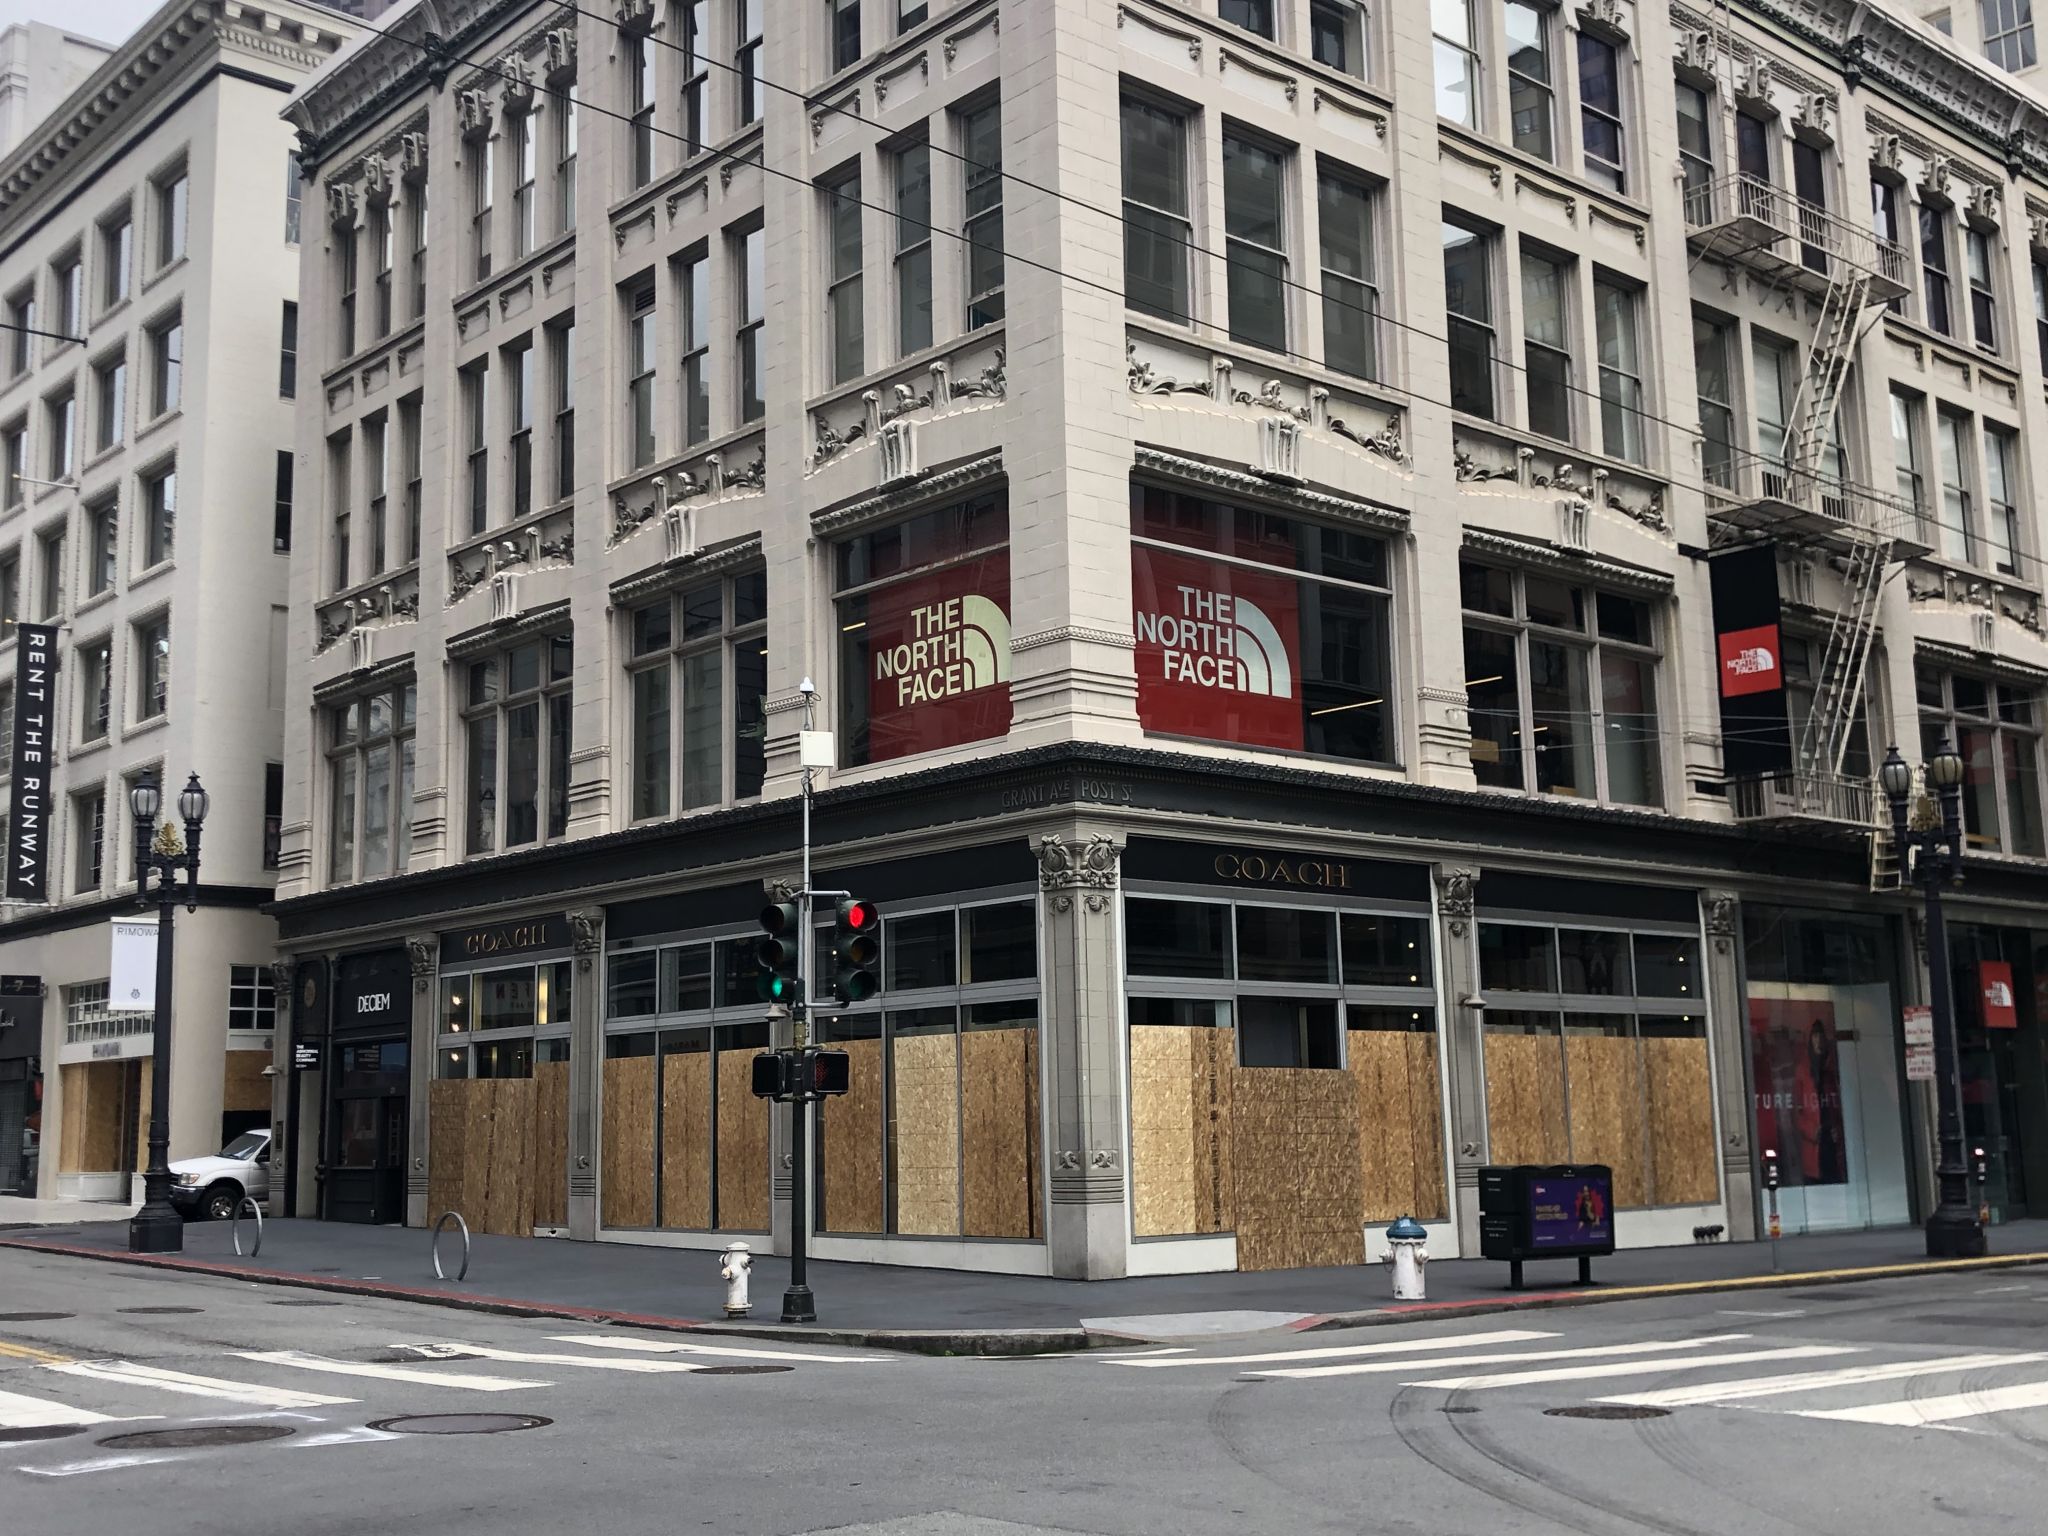 See the boarded-up designer storefronts in San Francisco's Union